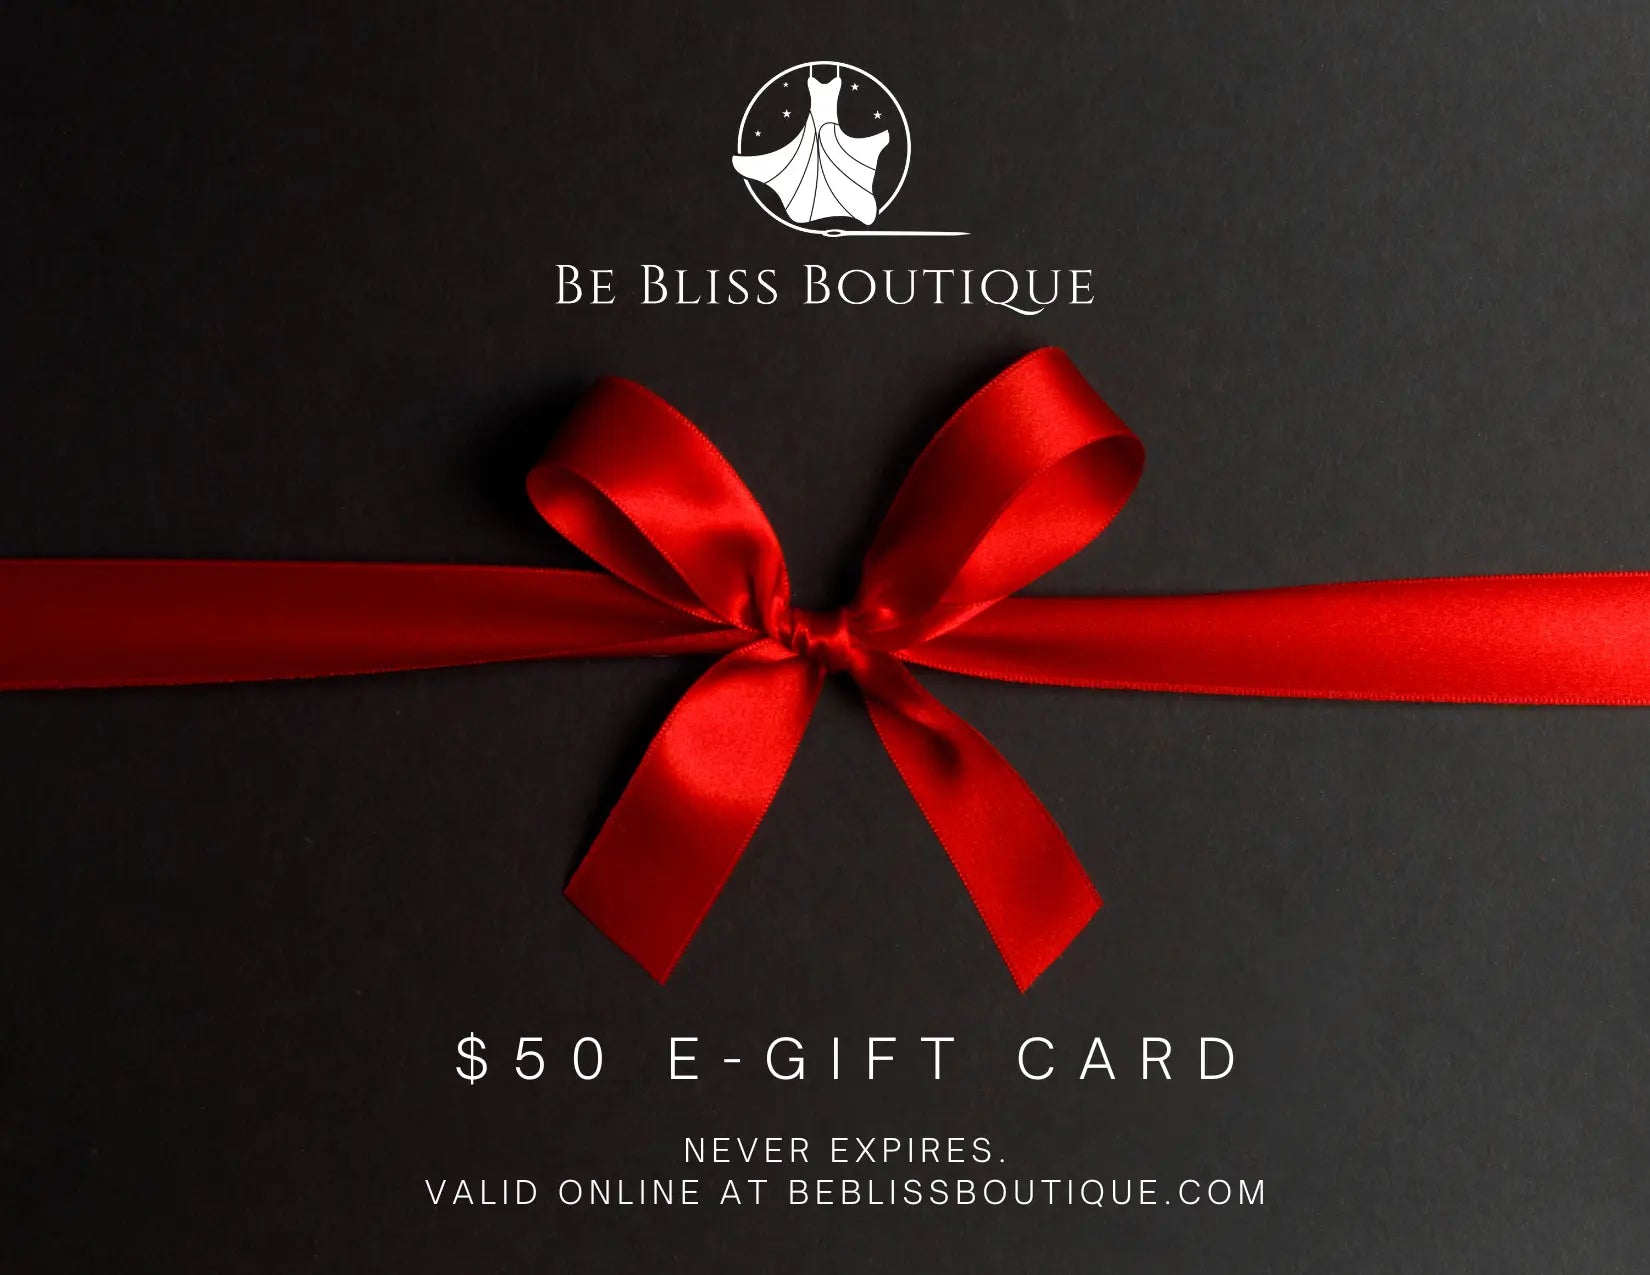 E-Gift Card for Be Bliss Boutique